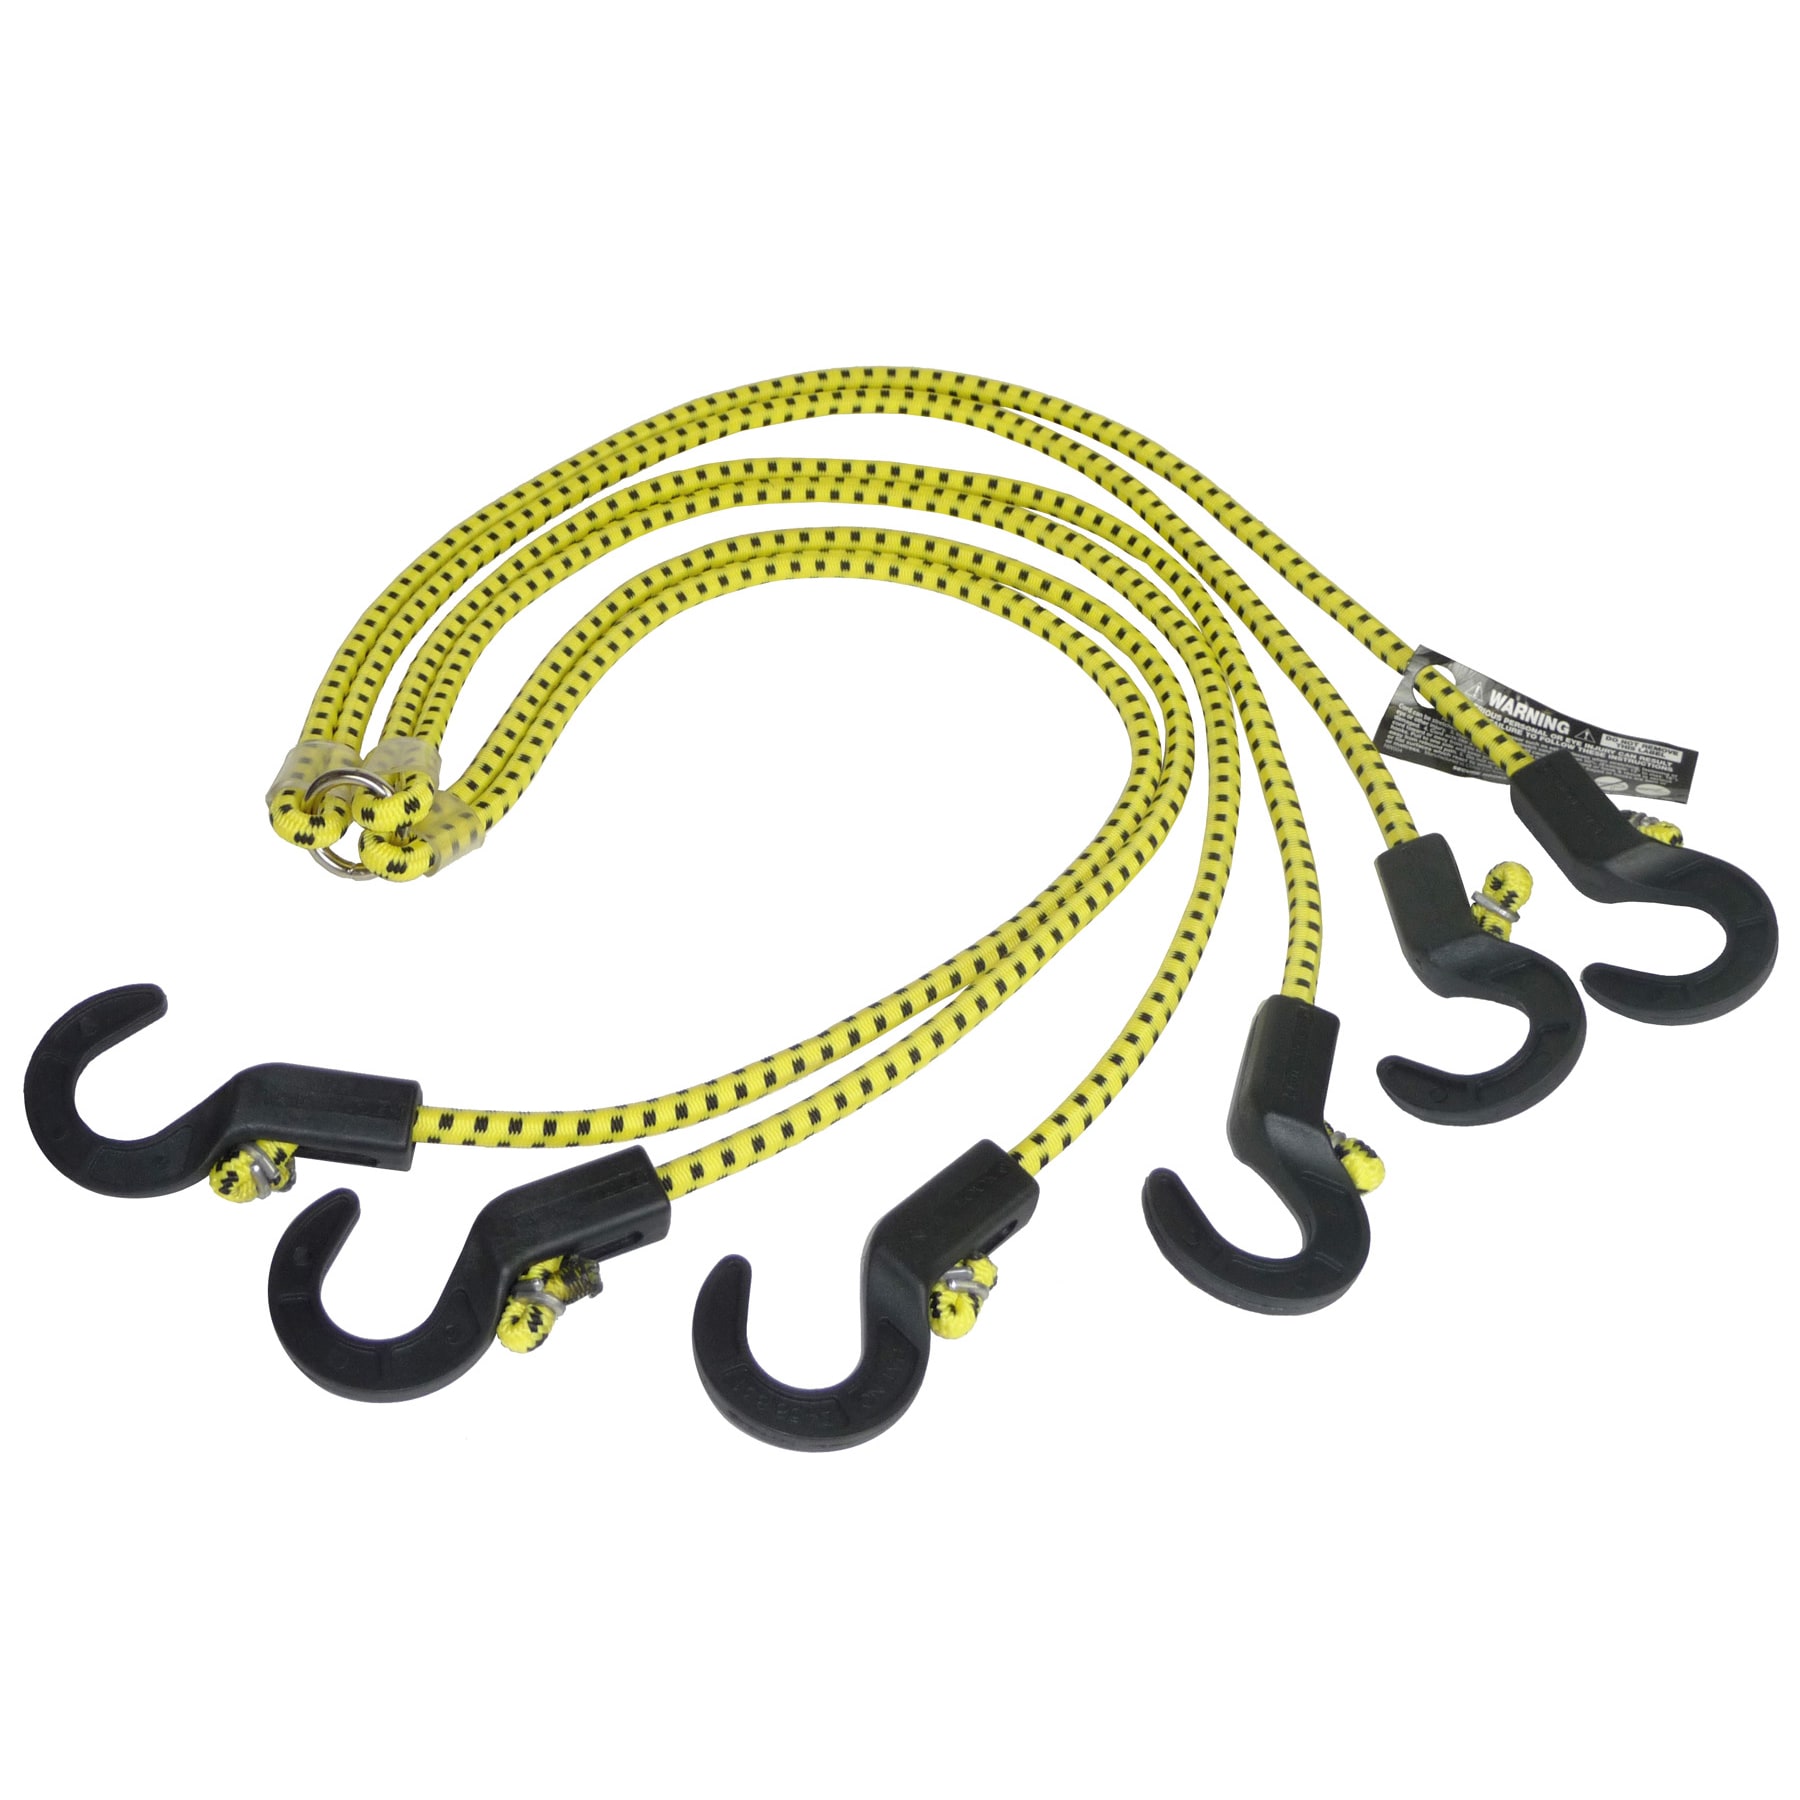 6 inch bungee cords